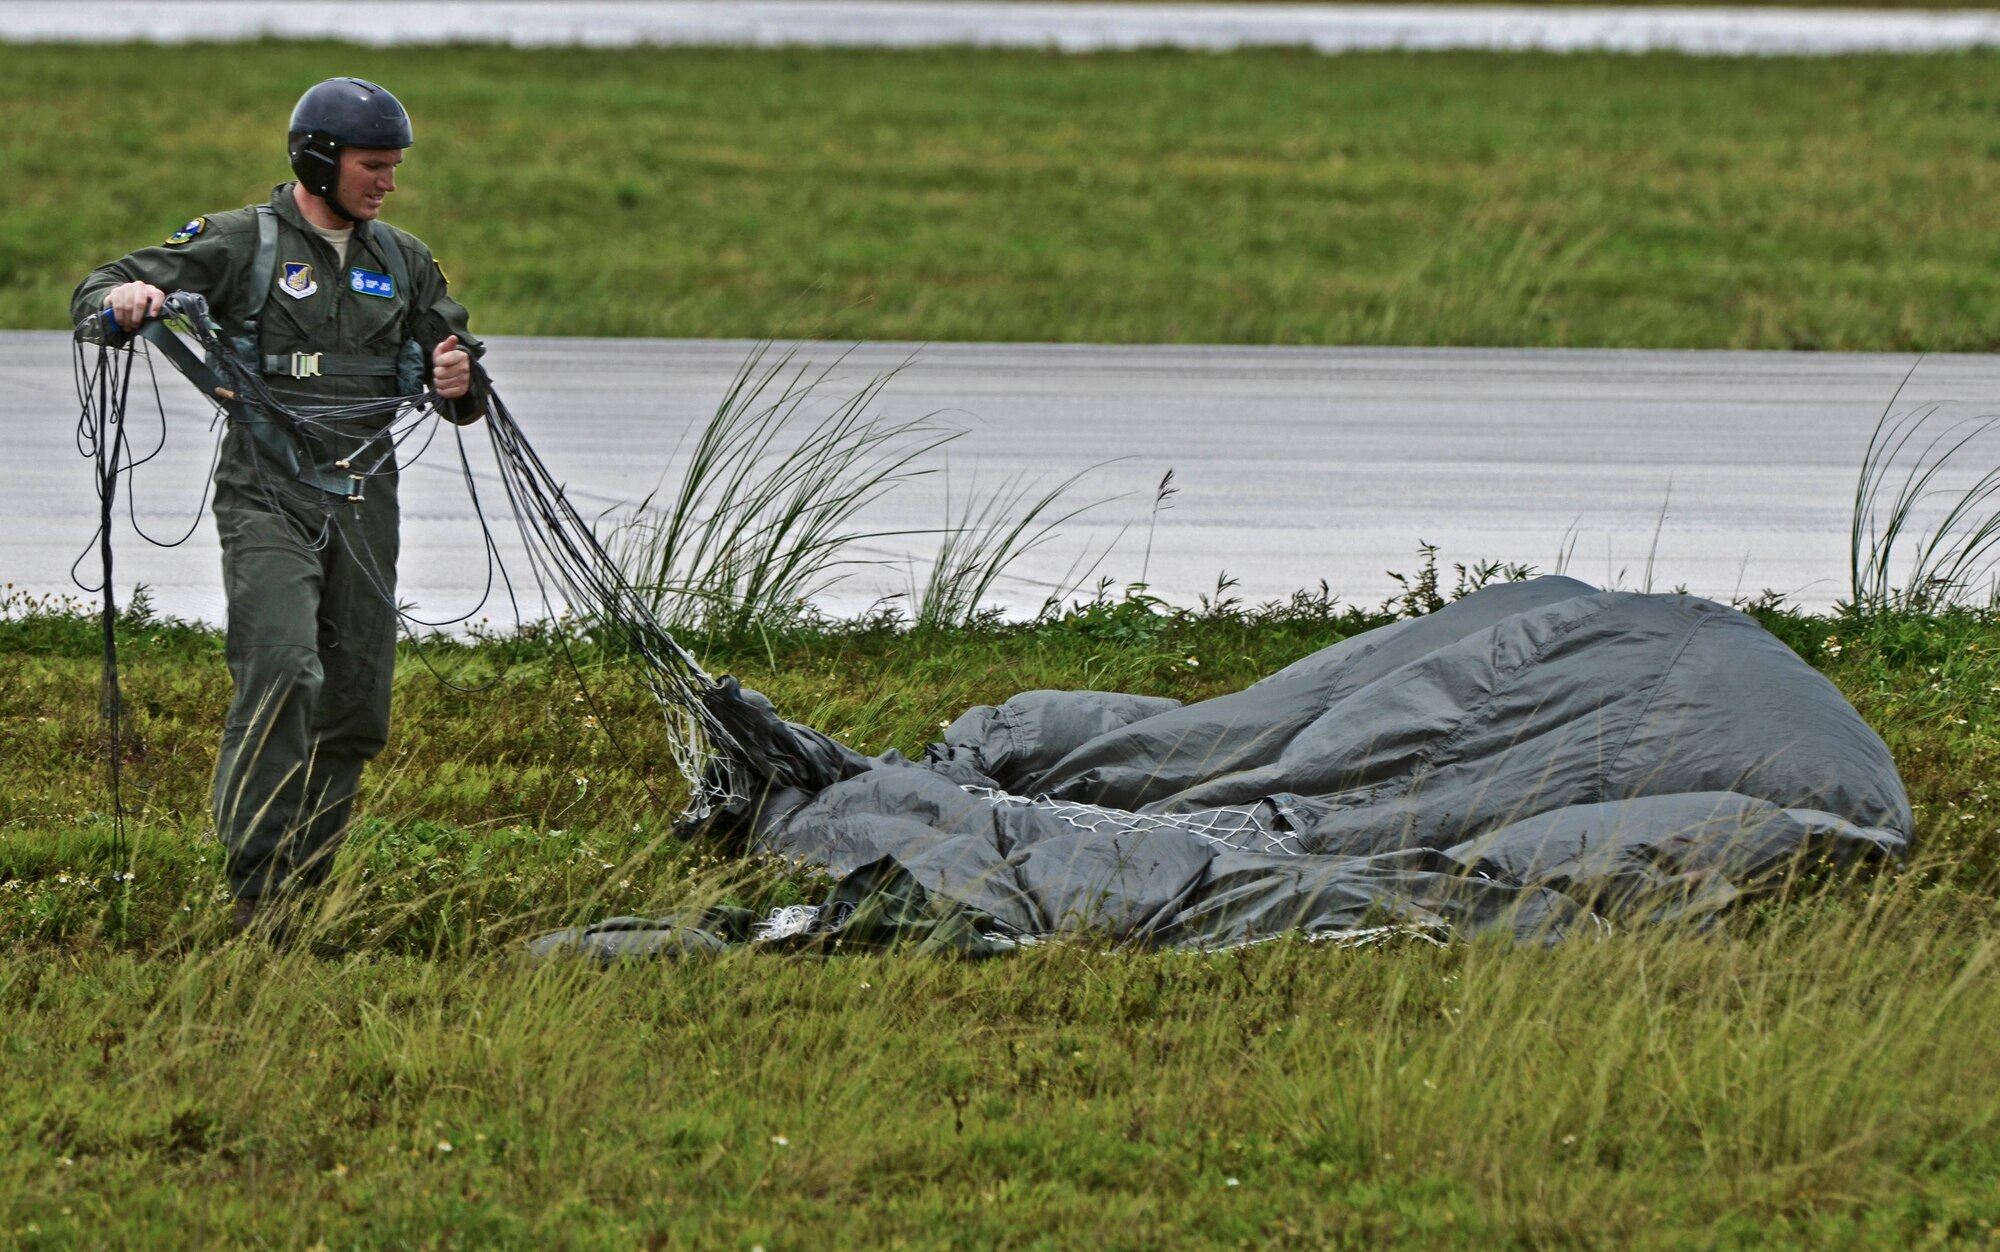 Staff Sgt. Daniel Guy, 736th Security Forces Squadron fire team leader, collects his parachute Aug. 21, 2013 after a static line jump on Andersen Air Force Base, Guam, flightline. As the integrated force protection element of the 36th Contingency Response Group, members of the 736th SFS provide a quick-response airborne capability that serves as an advance echelon team for contingency and humanitarian missions all over the Asia-Pacific region. (U.S. Air Force photo by Airman 1st Class Marianique Santos/Released)